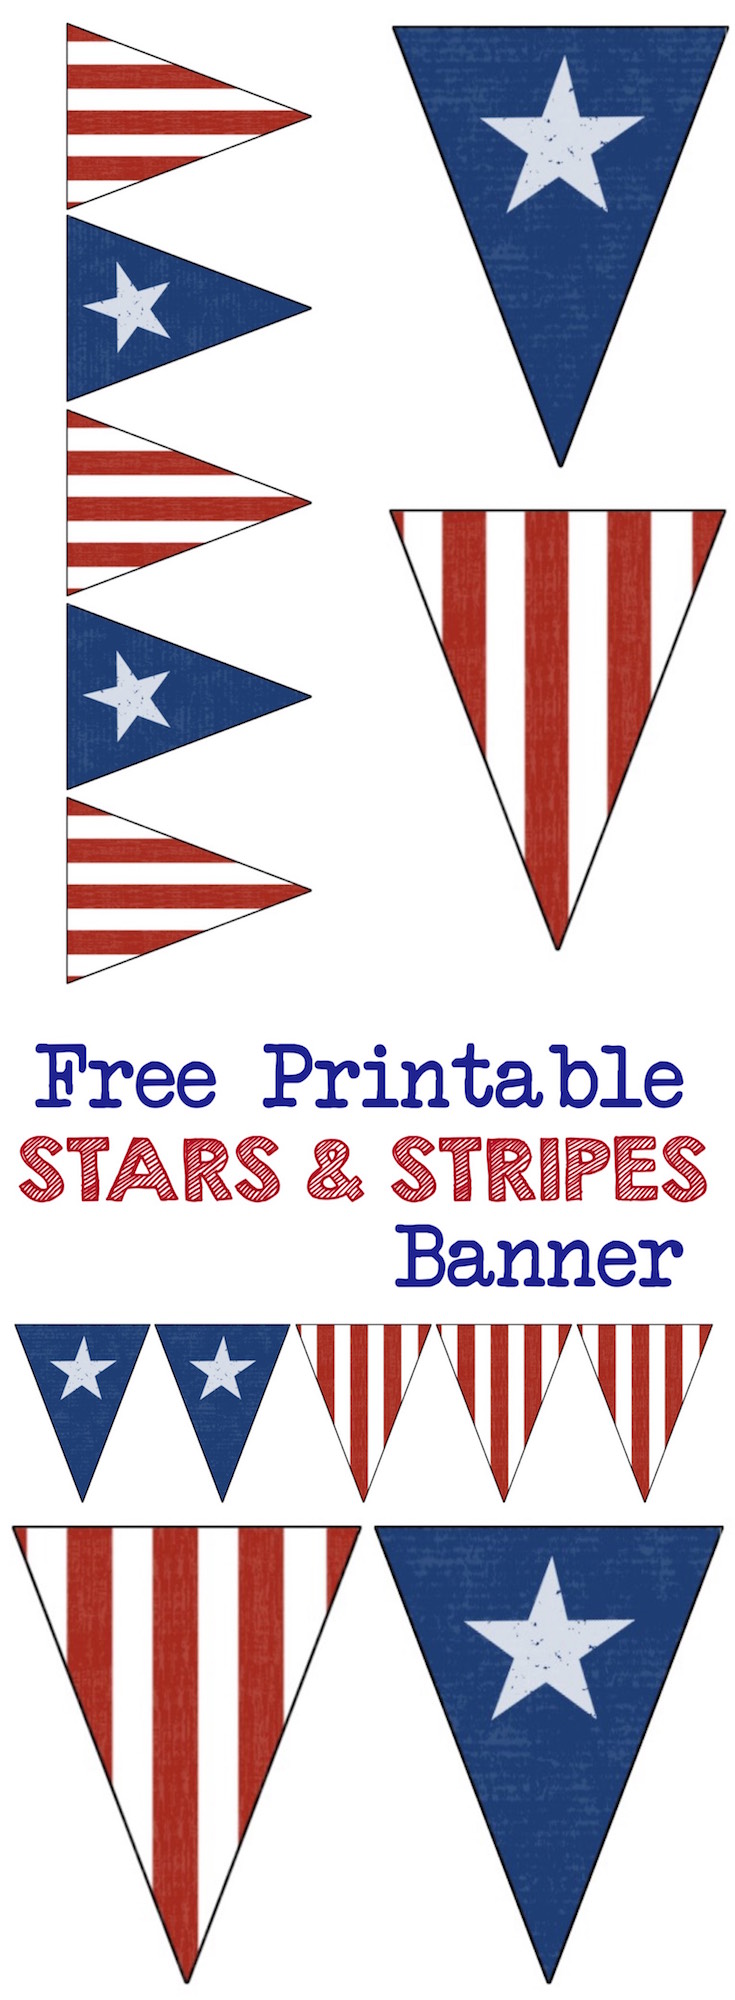 Stars & Stripes Banner Free Printable. Decorate with this American flag inspired banner for Memorial Day, Fourth of July, Veterans Day or any patriotic holiday. Independence day, 4th of July, July 4th